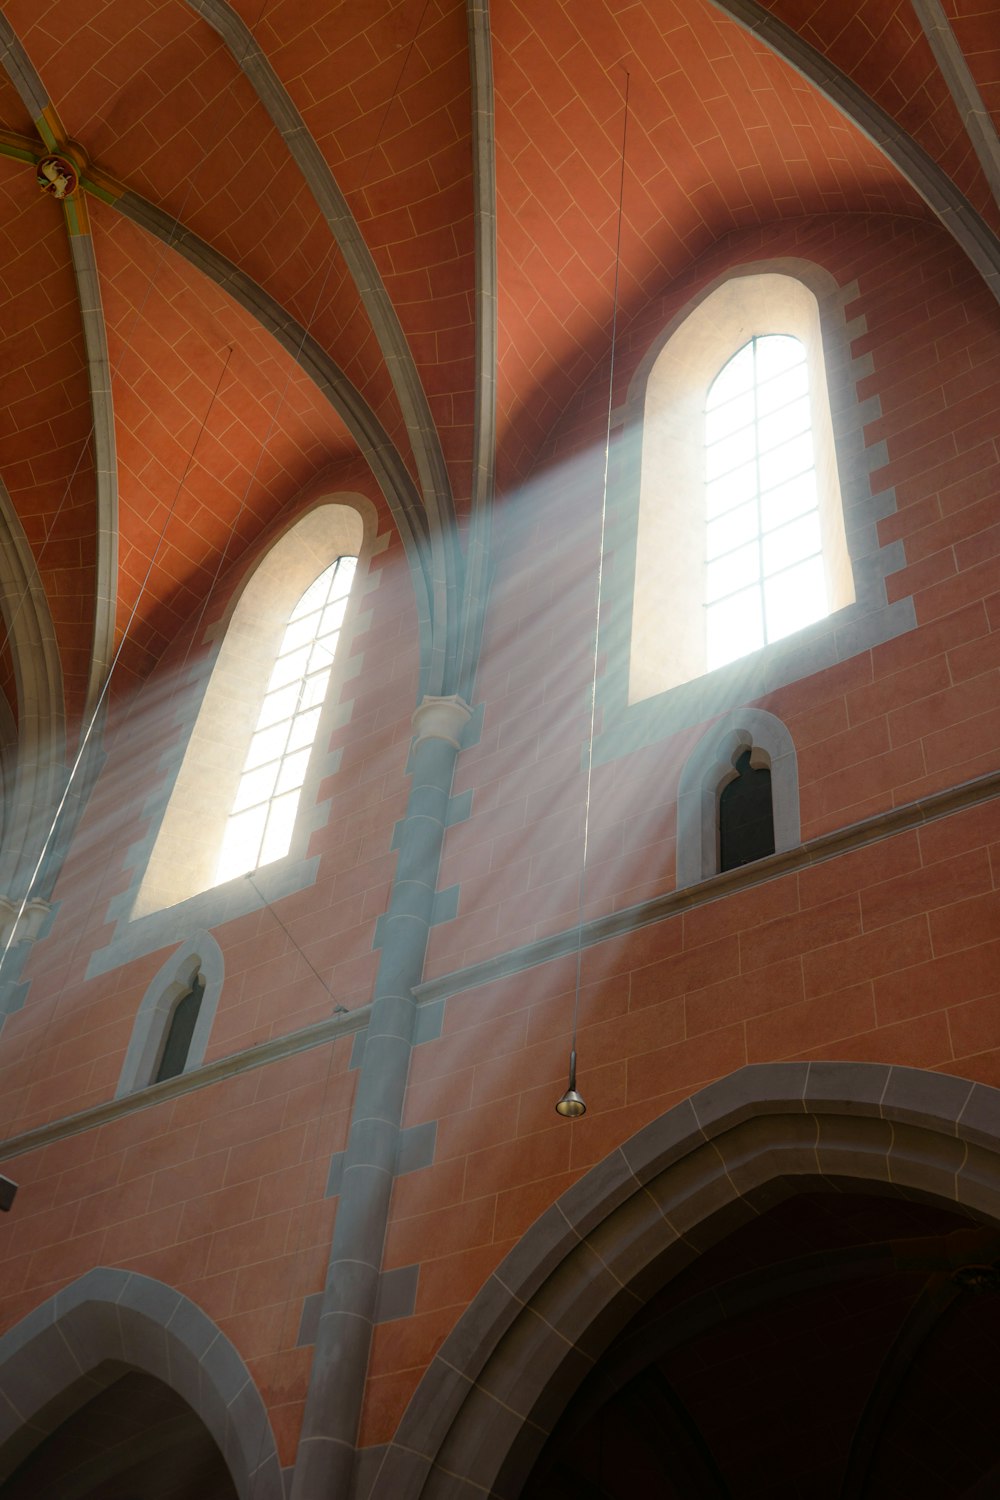 sunlight streaming through two windows in a building